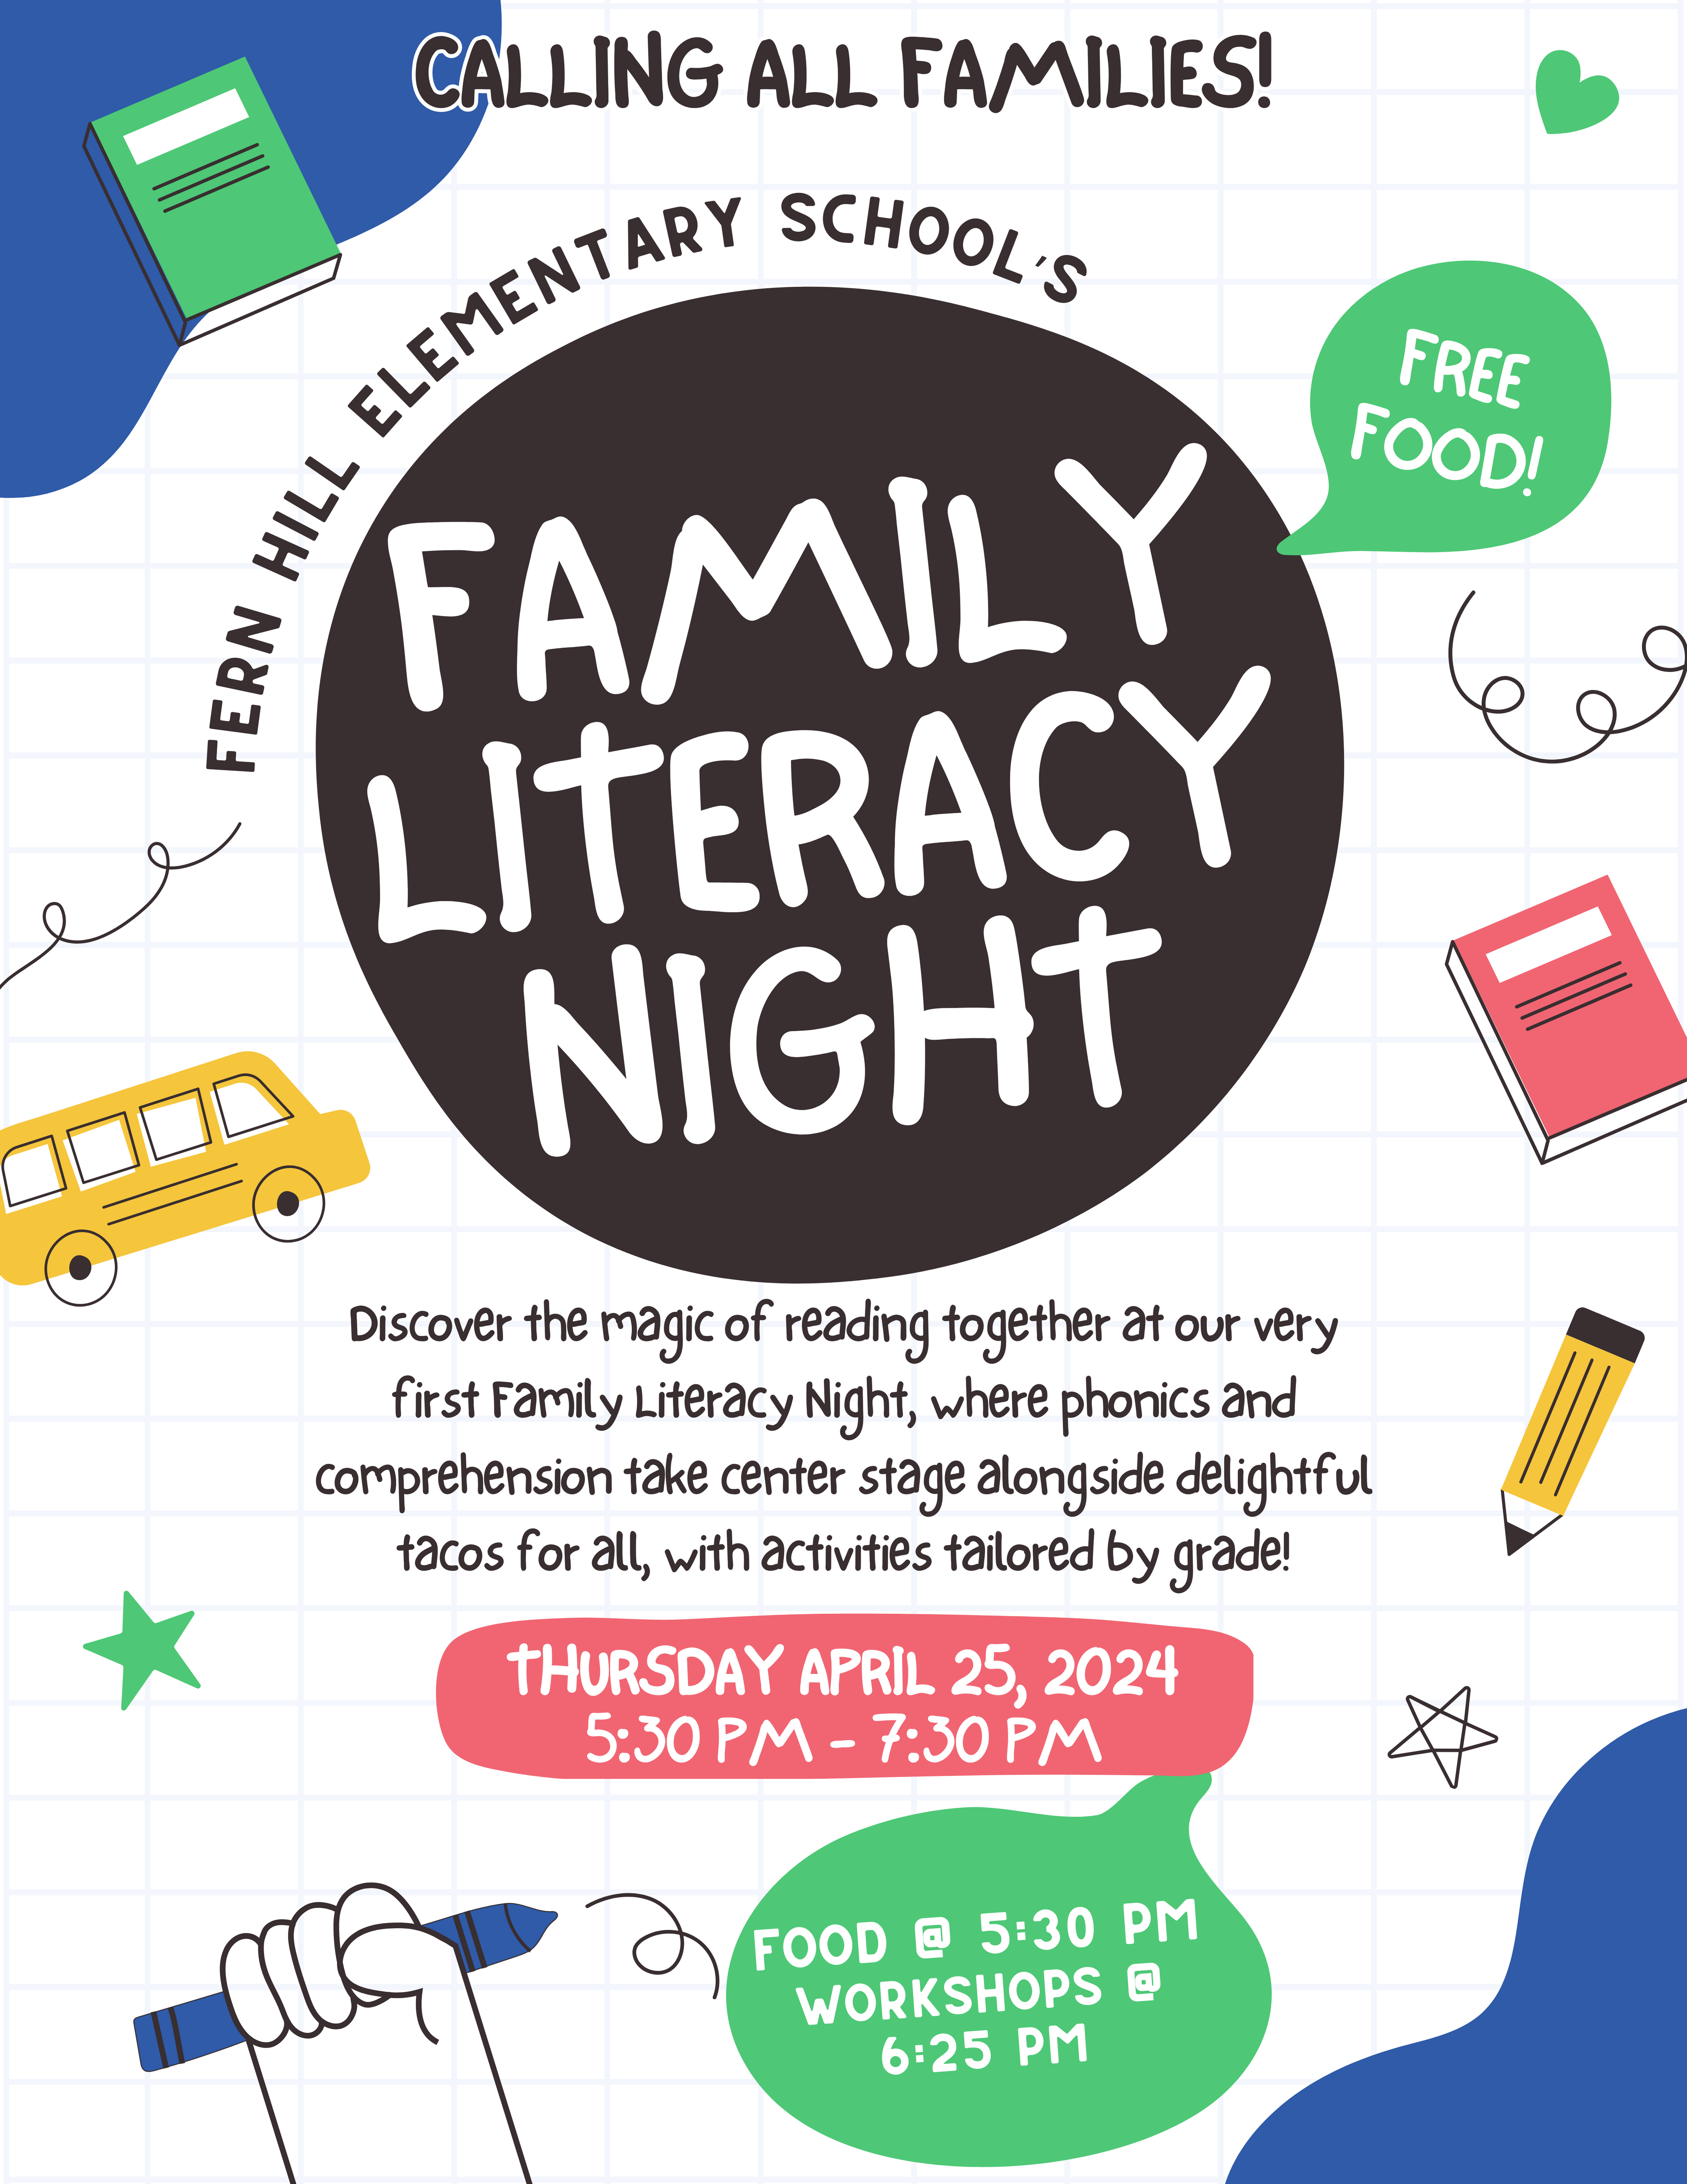 Family Literacy night Literacy Workshops start at 6:25, food at 5:30 on April 25